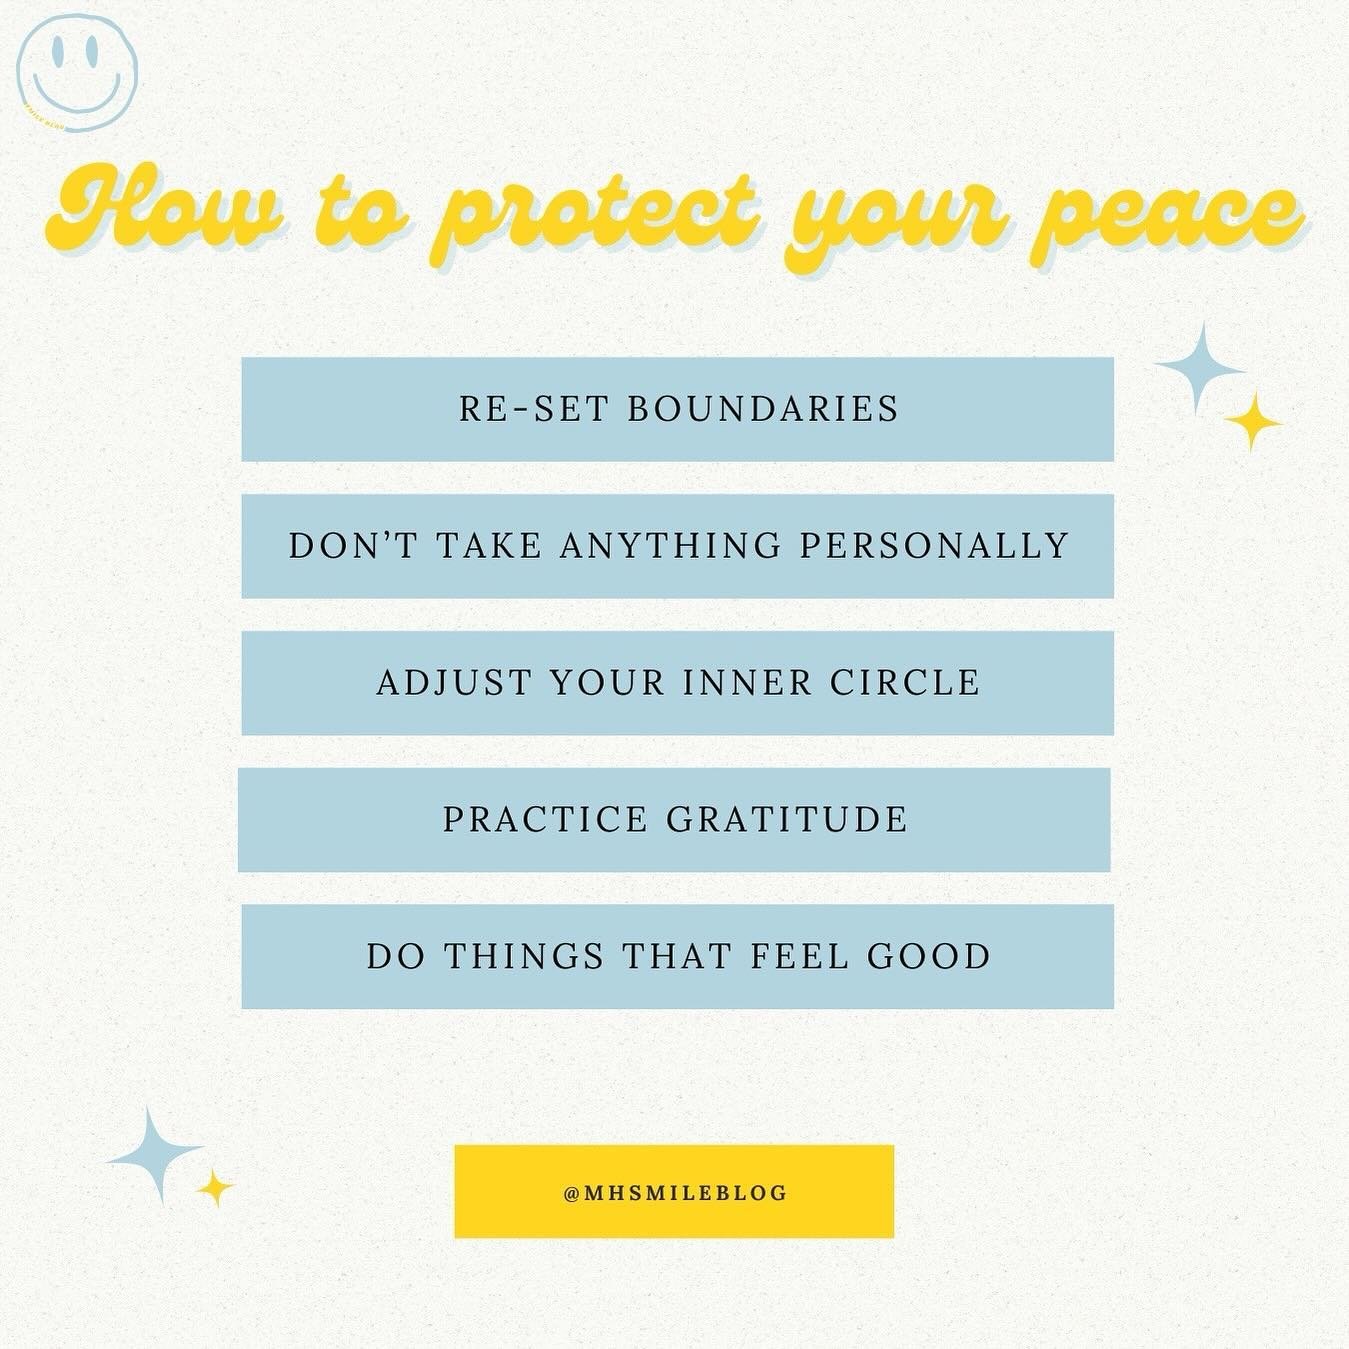 This mental health month we are focusing on protecting our peace! Here are some ways you can protect your peace. 

Have a great day⚡️🩵😁 
.
.
.
.
.
Want to learn more about us? Check us out @ mhsmileblog.com. Link is in bio

#selfcare #awareness #me